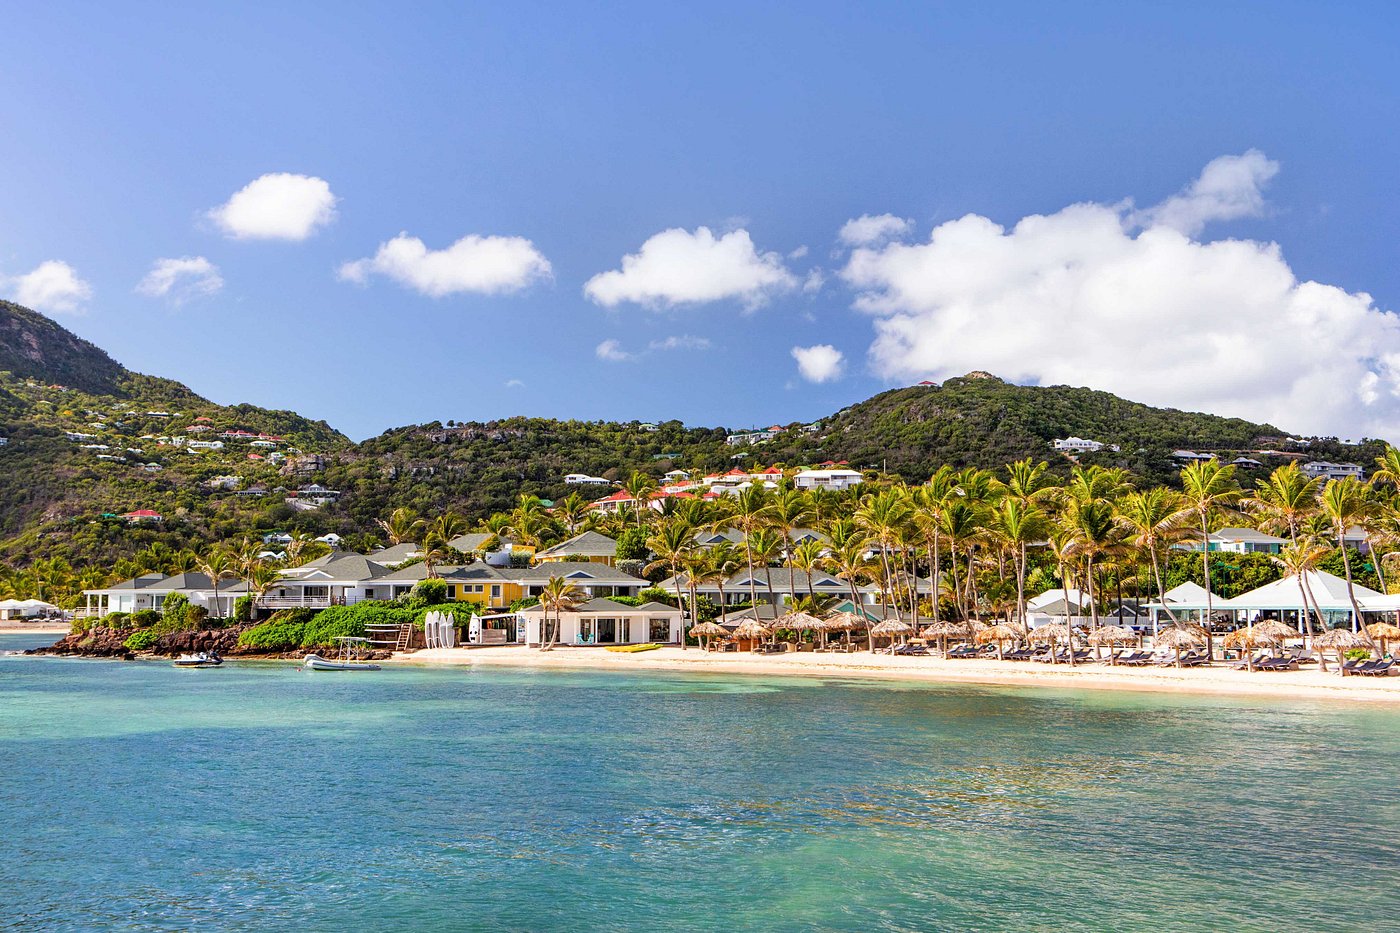 Top 10 Luxurious Resorts and Hotels in St. Barths - Luxury Hotel Deals